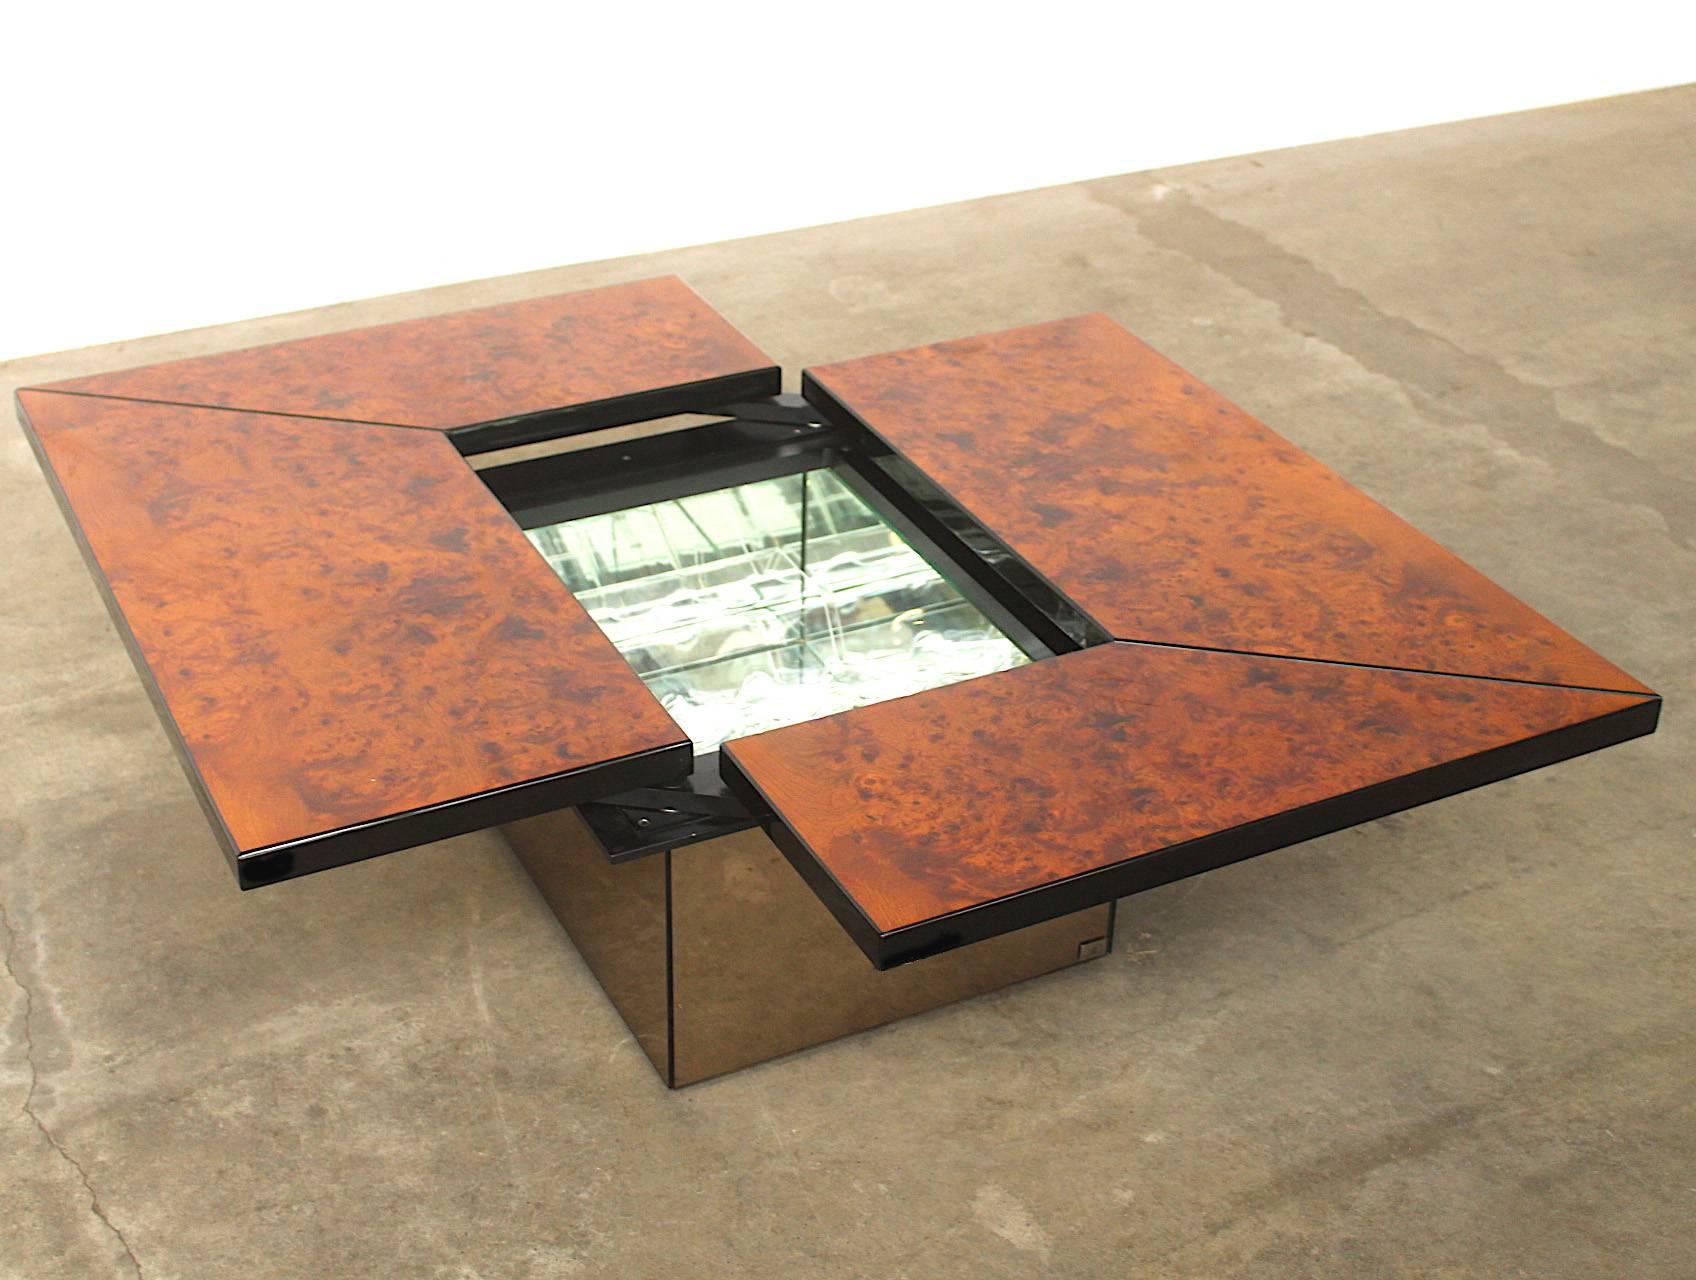 Stunning high gloss signed coffee table in lacquered burl wood by French designer Paul Michel. The table slides open to reveal a fully mirrored dry bar with storage for four liquor bottles and a glass shelf for glasses. The outside of the base is